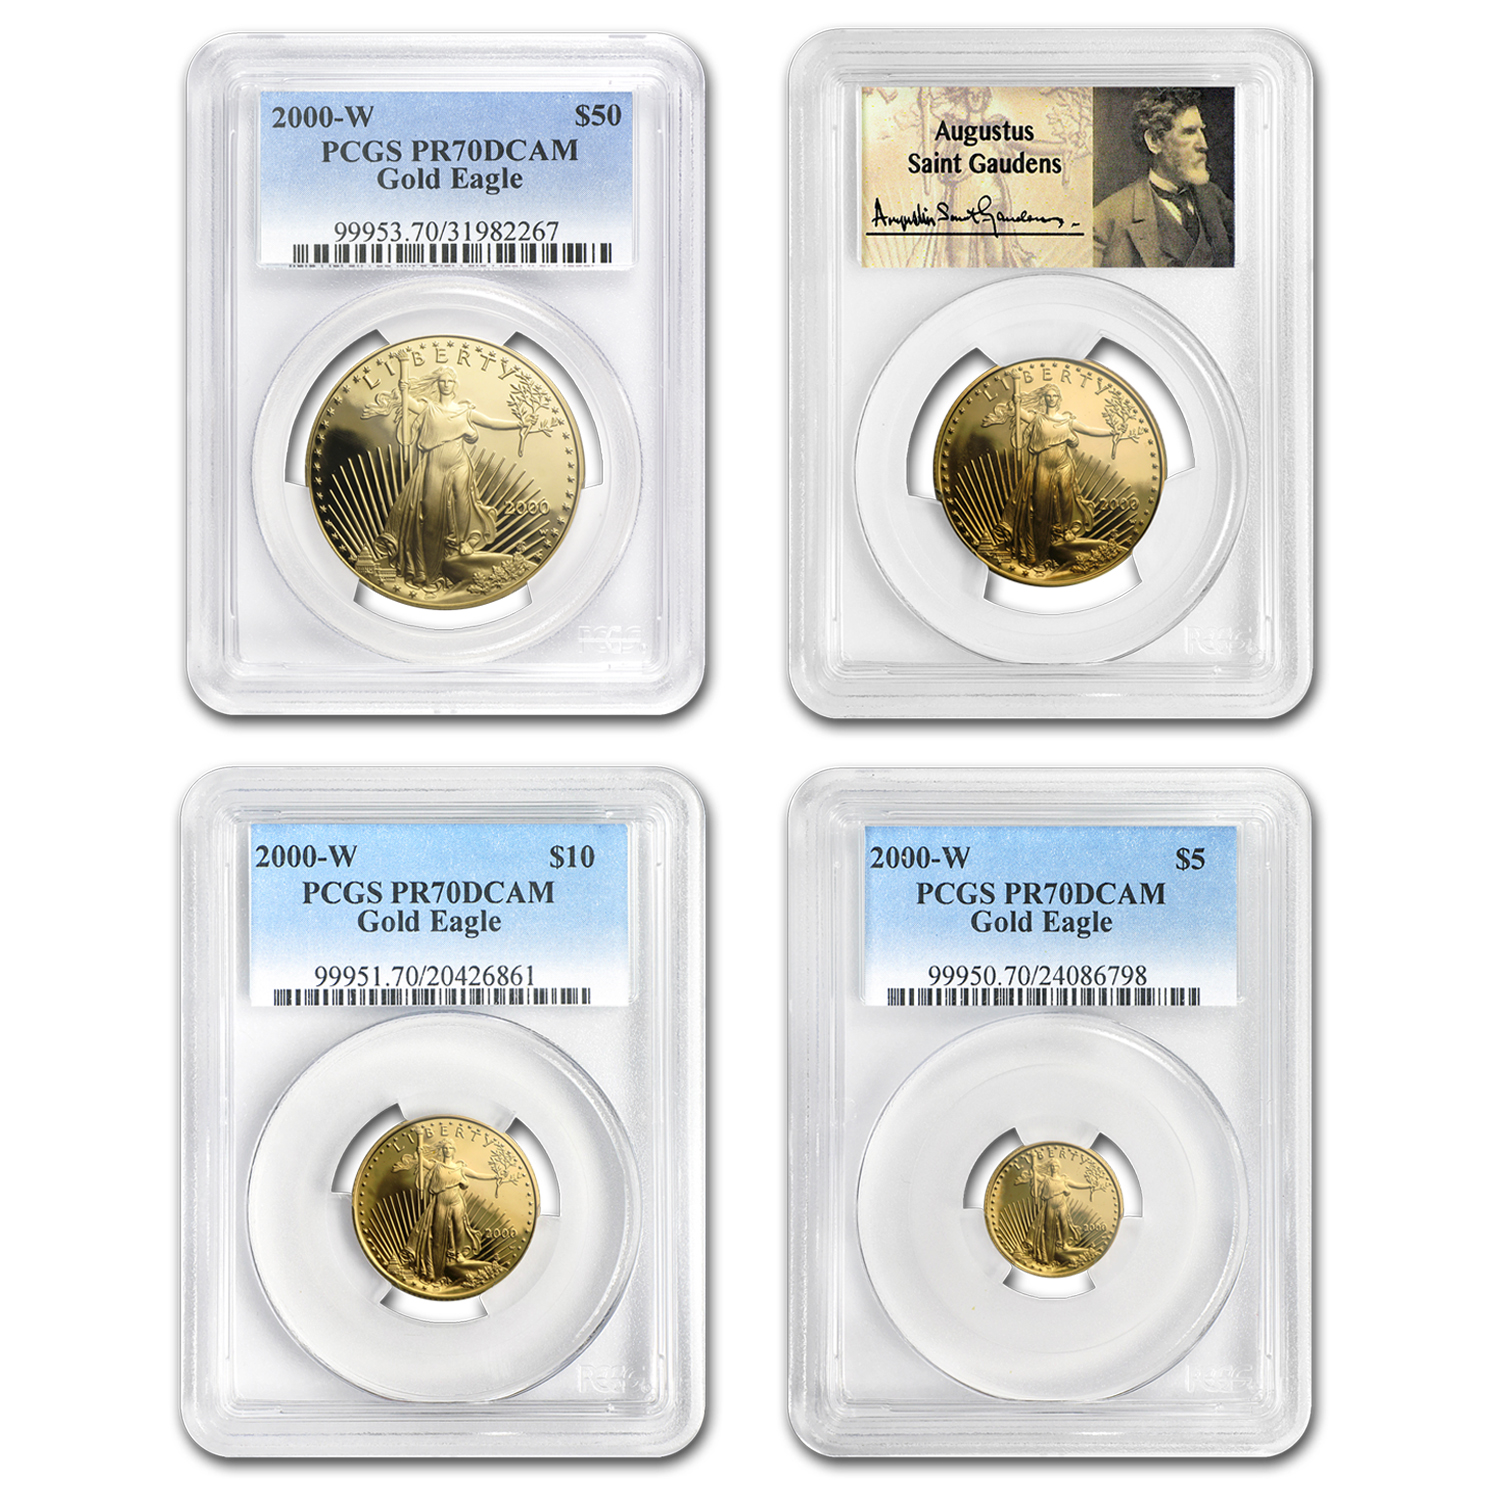 Buy 2000-W 4-Coin Proof American Gold Eagle Set PR-70 PCGS